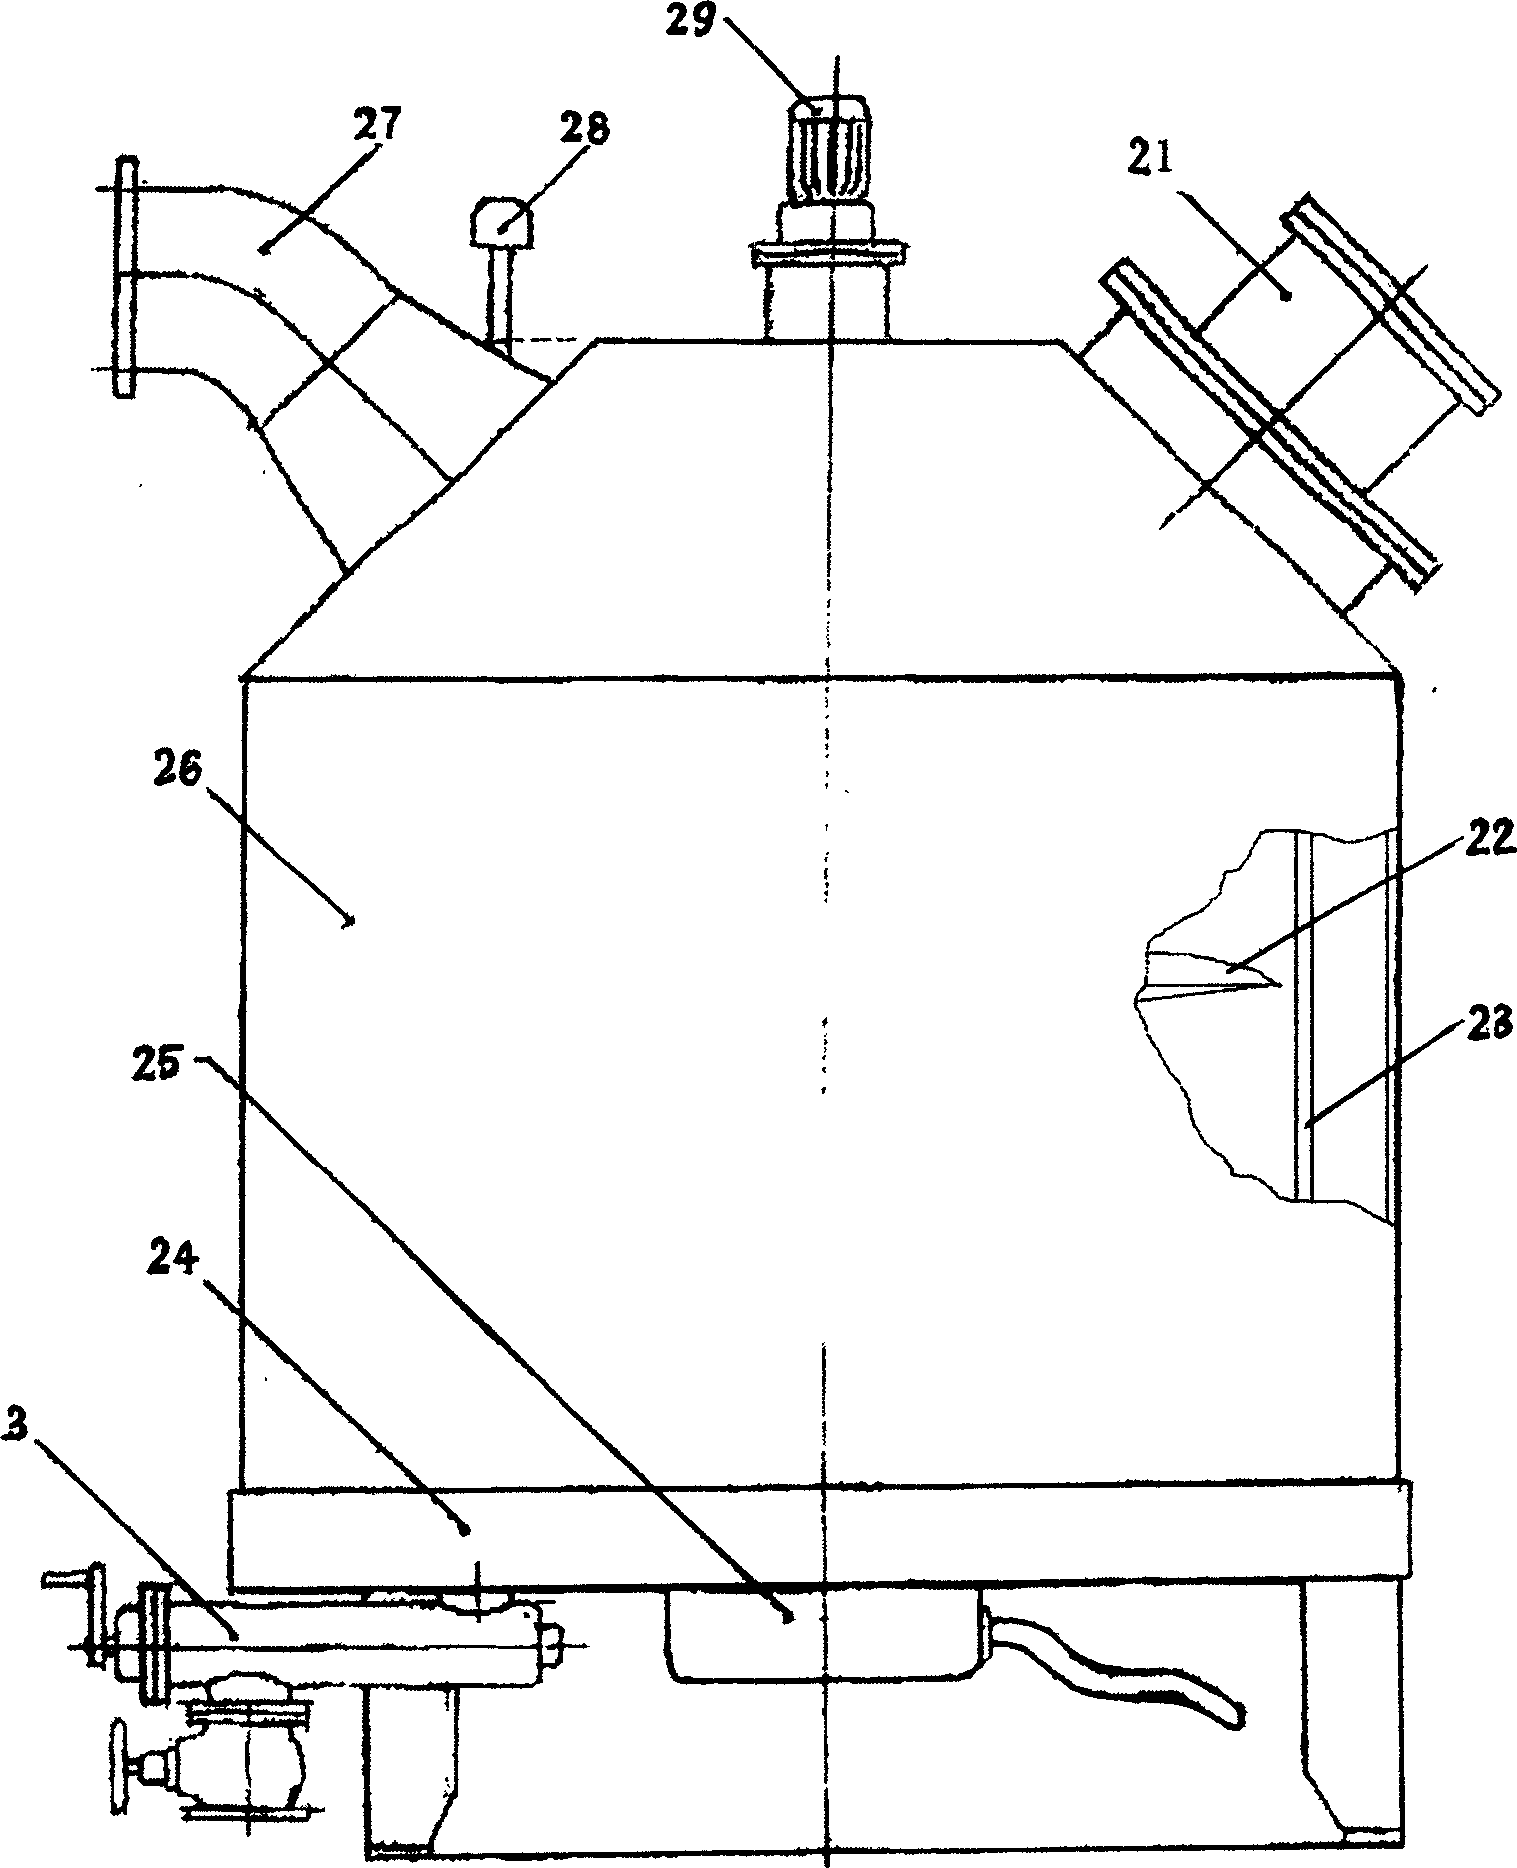 Method and device for producing fuel using waste plastics